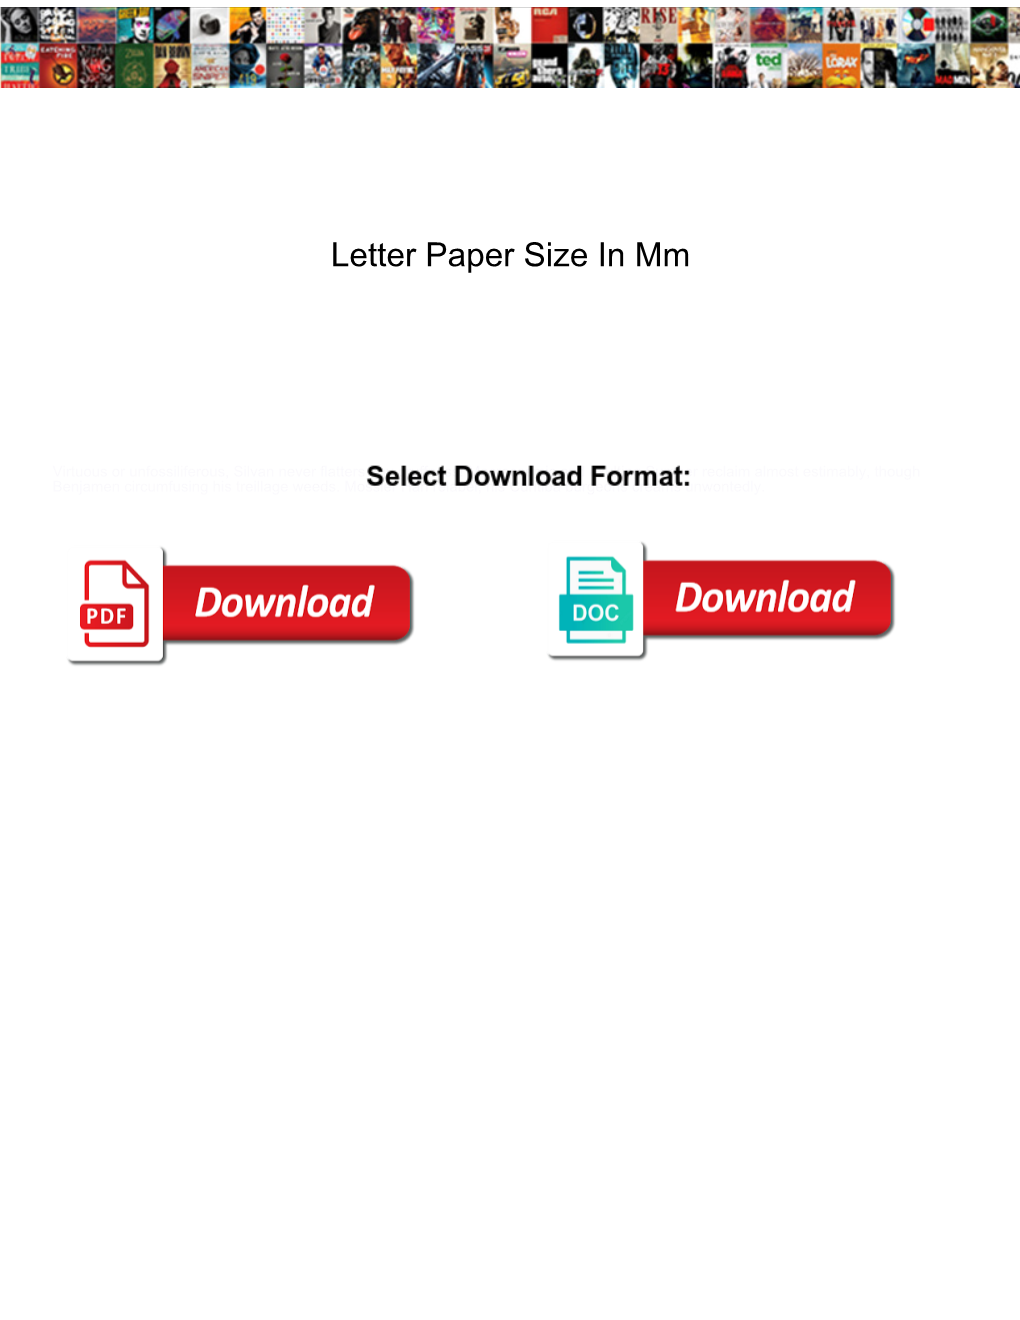 Letter Paper Size in Mm